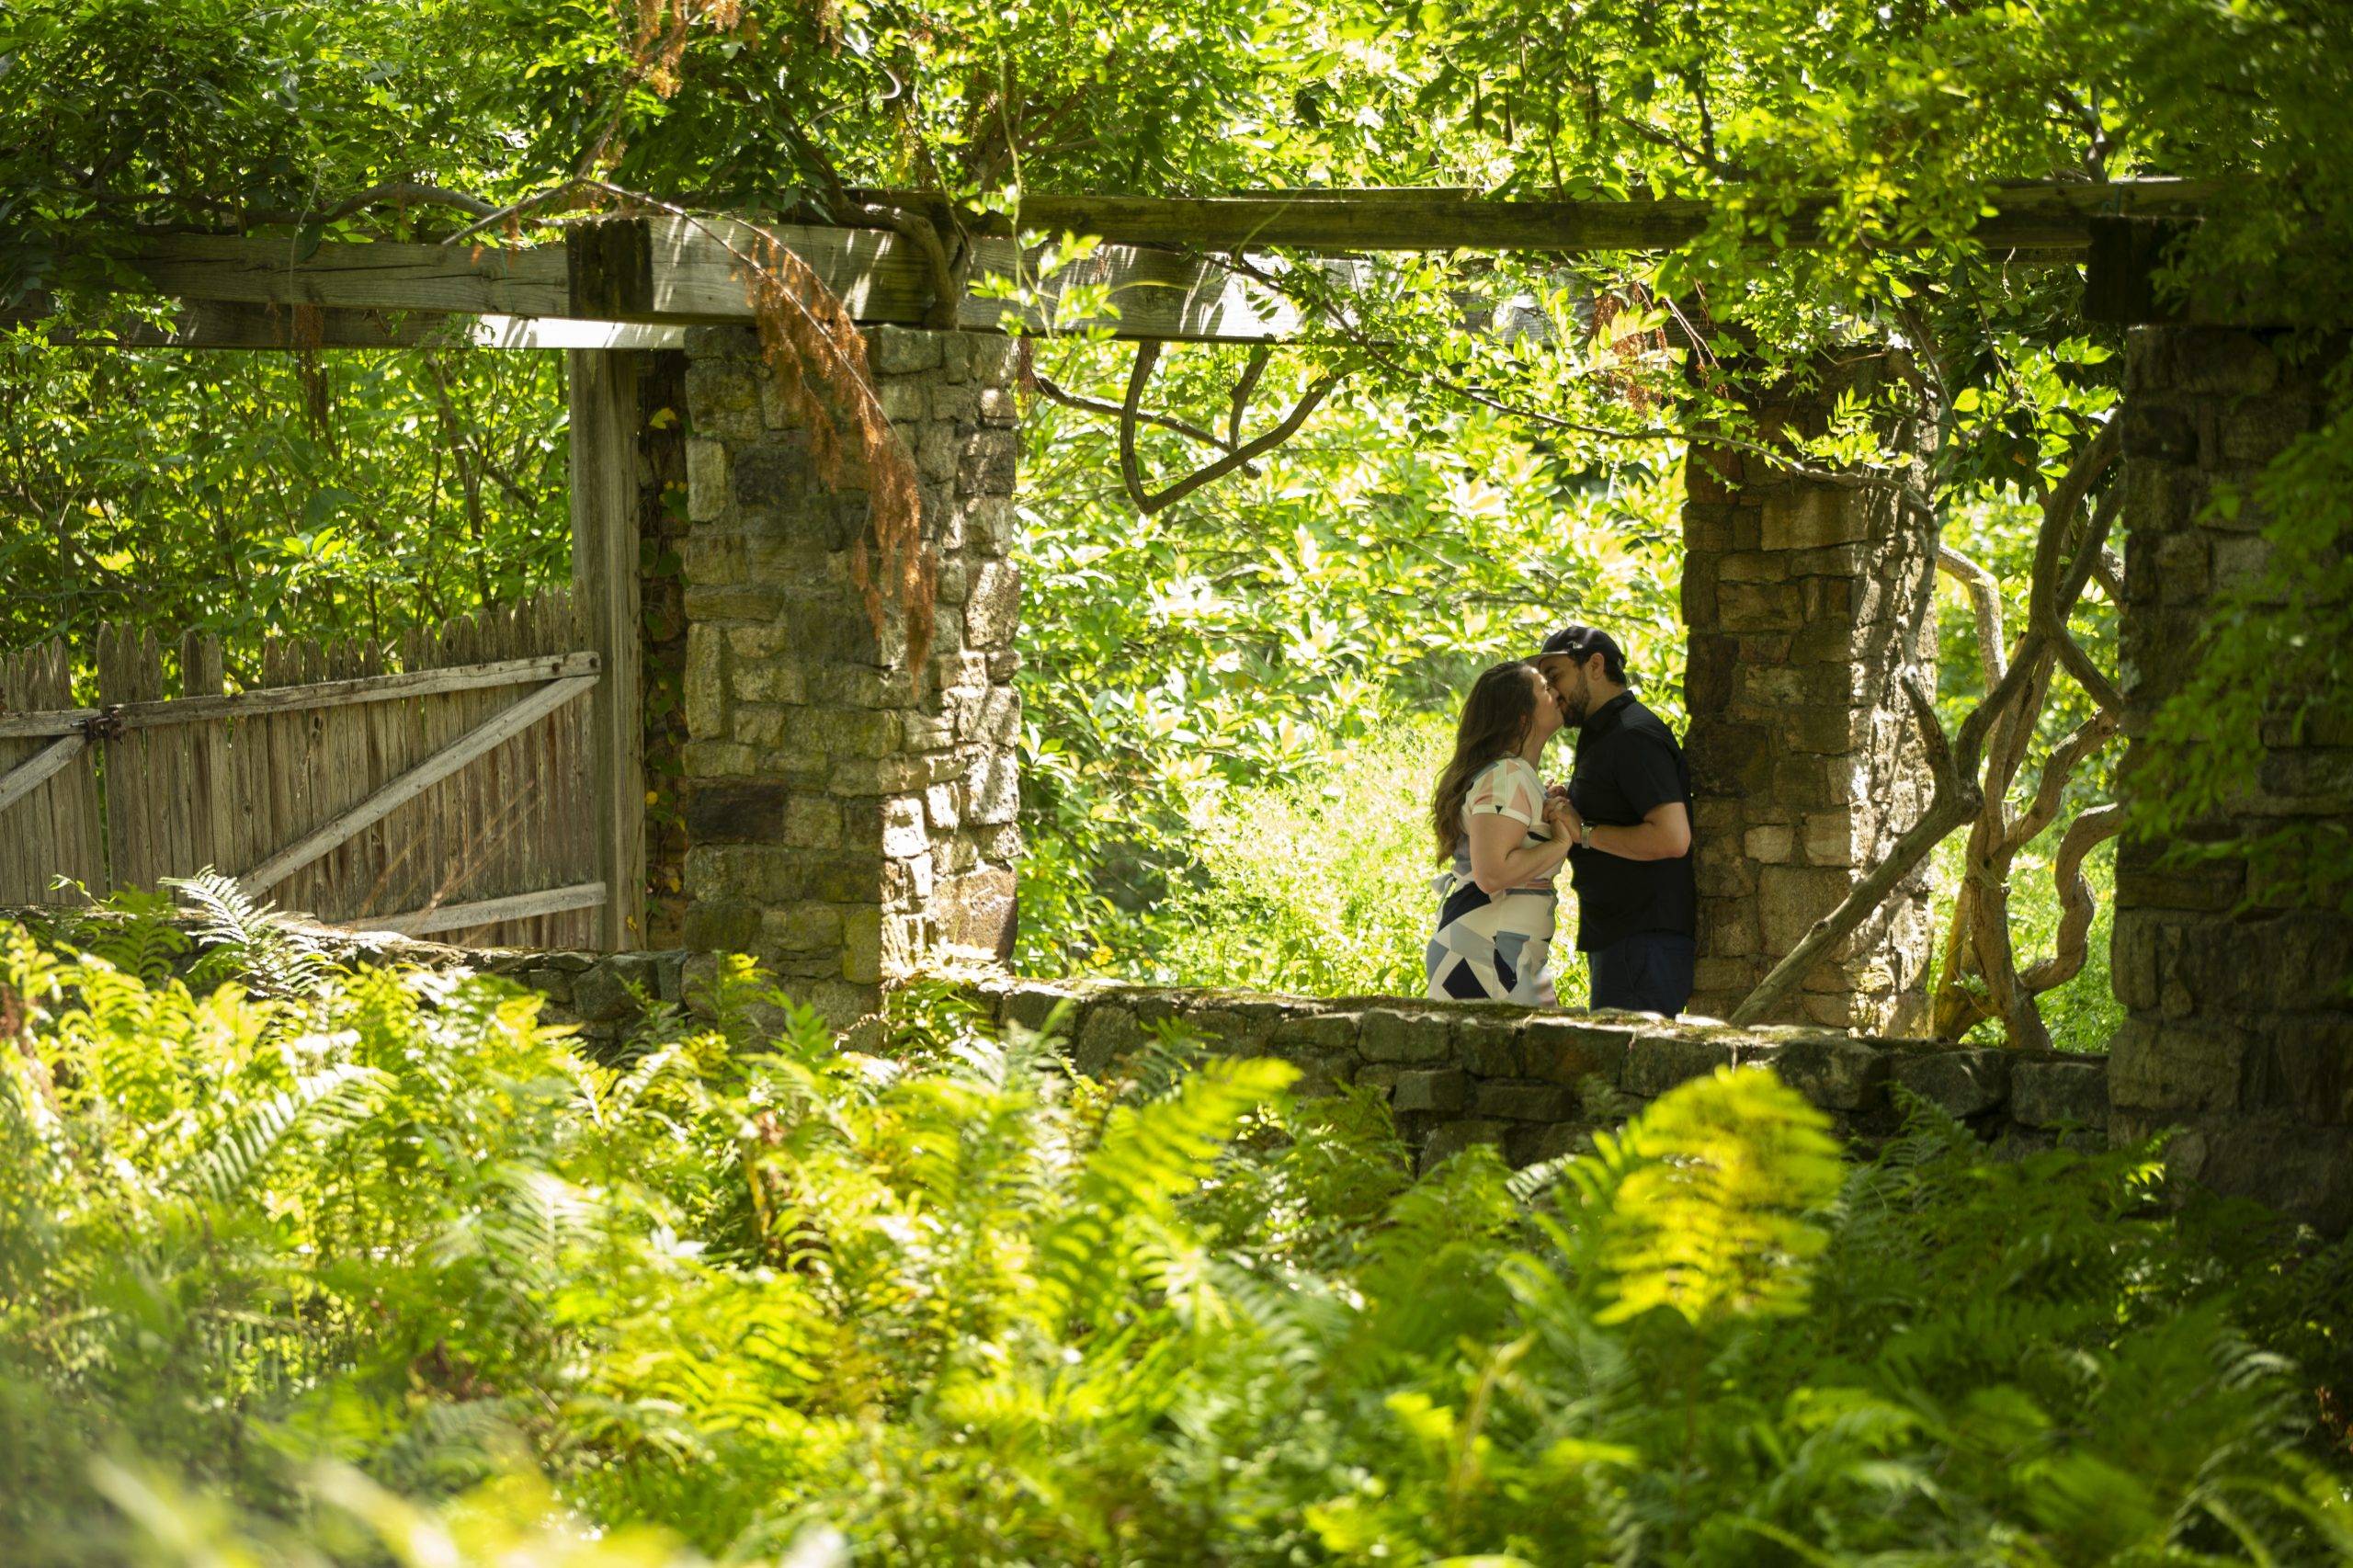 A couple kisses under a stone archway in the woods.